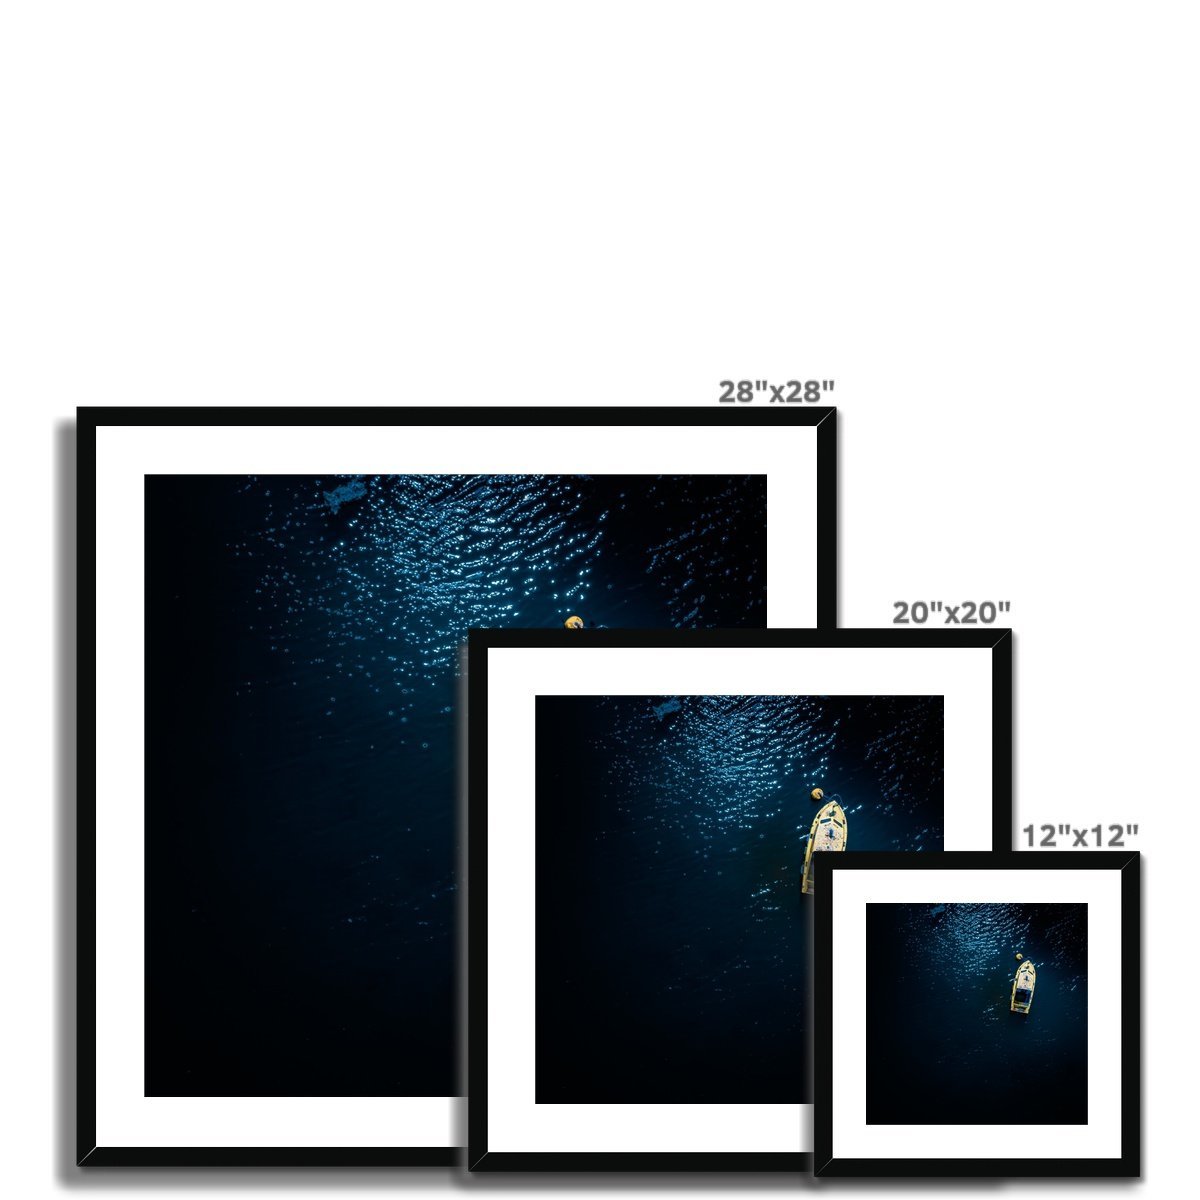 falmouth dark waters wooden frame sizes